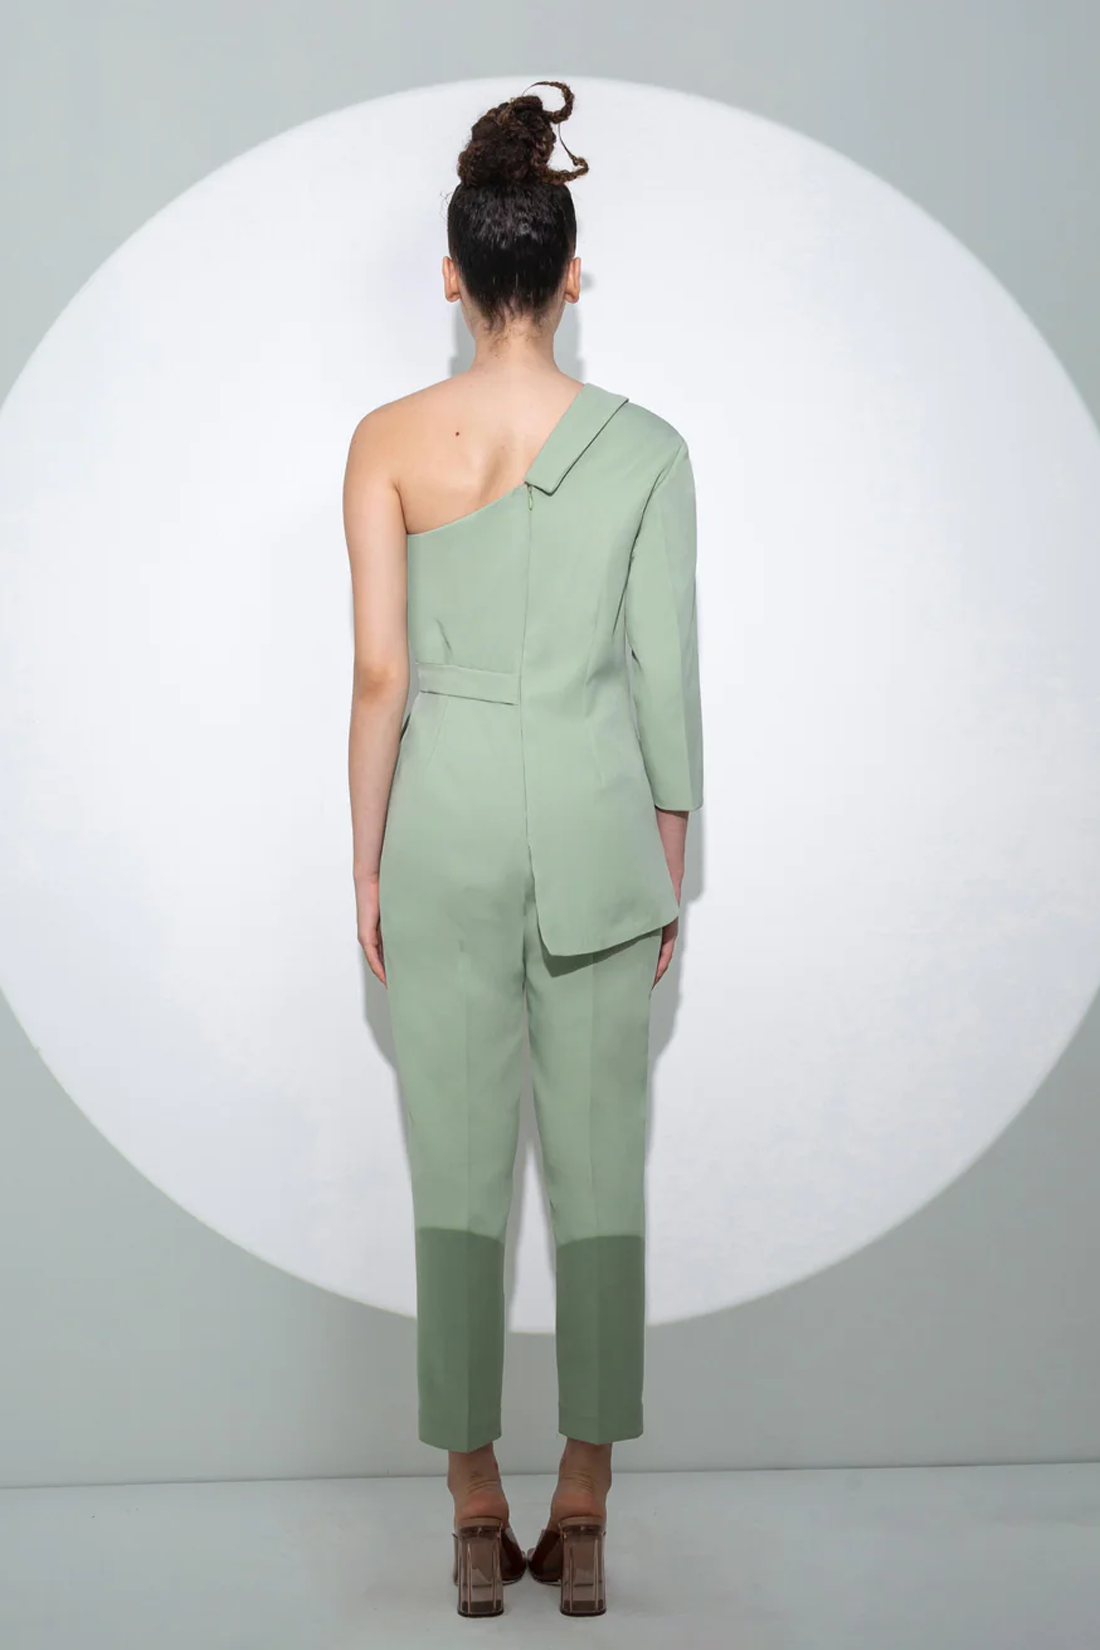 Thumbnail preview #12 for Half and Half Jumpsuit